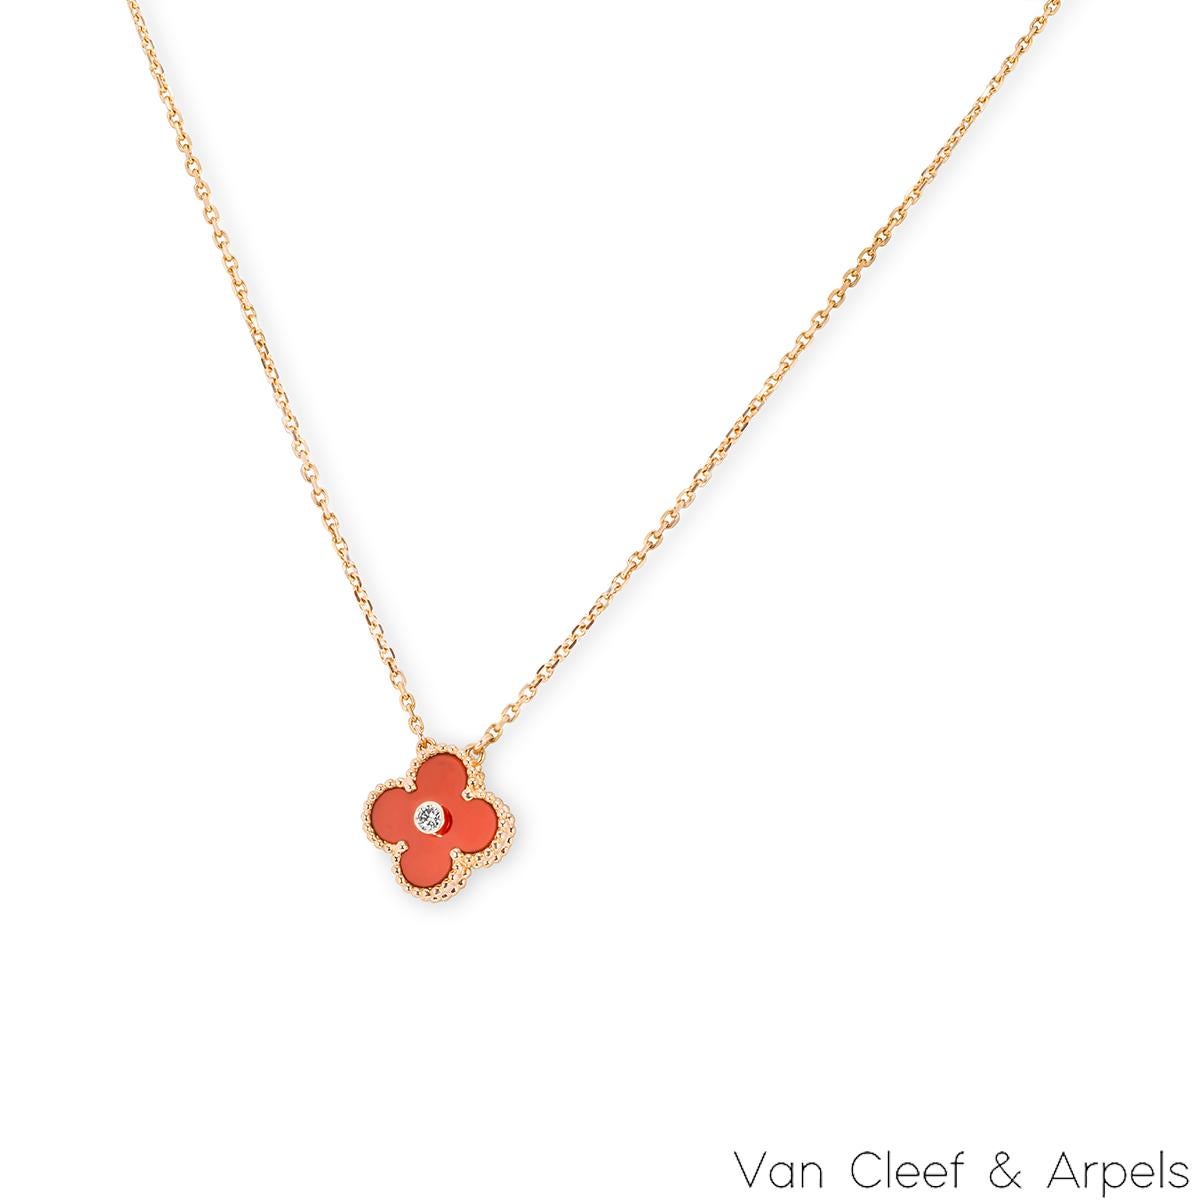 A limited edition 18k rose gold carnelian and diamond Van Cleef & Arpels Vintage Alhambra pendant from the 2011 Holiday collection. The pendant features a beaded edge 4 leaf clover motif with a carnelian inlay. Further complementing the carnelian